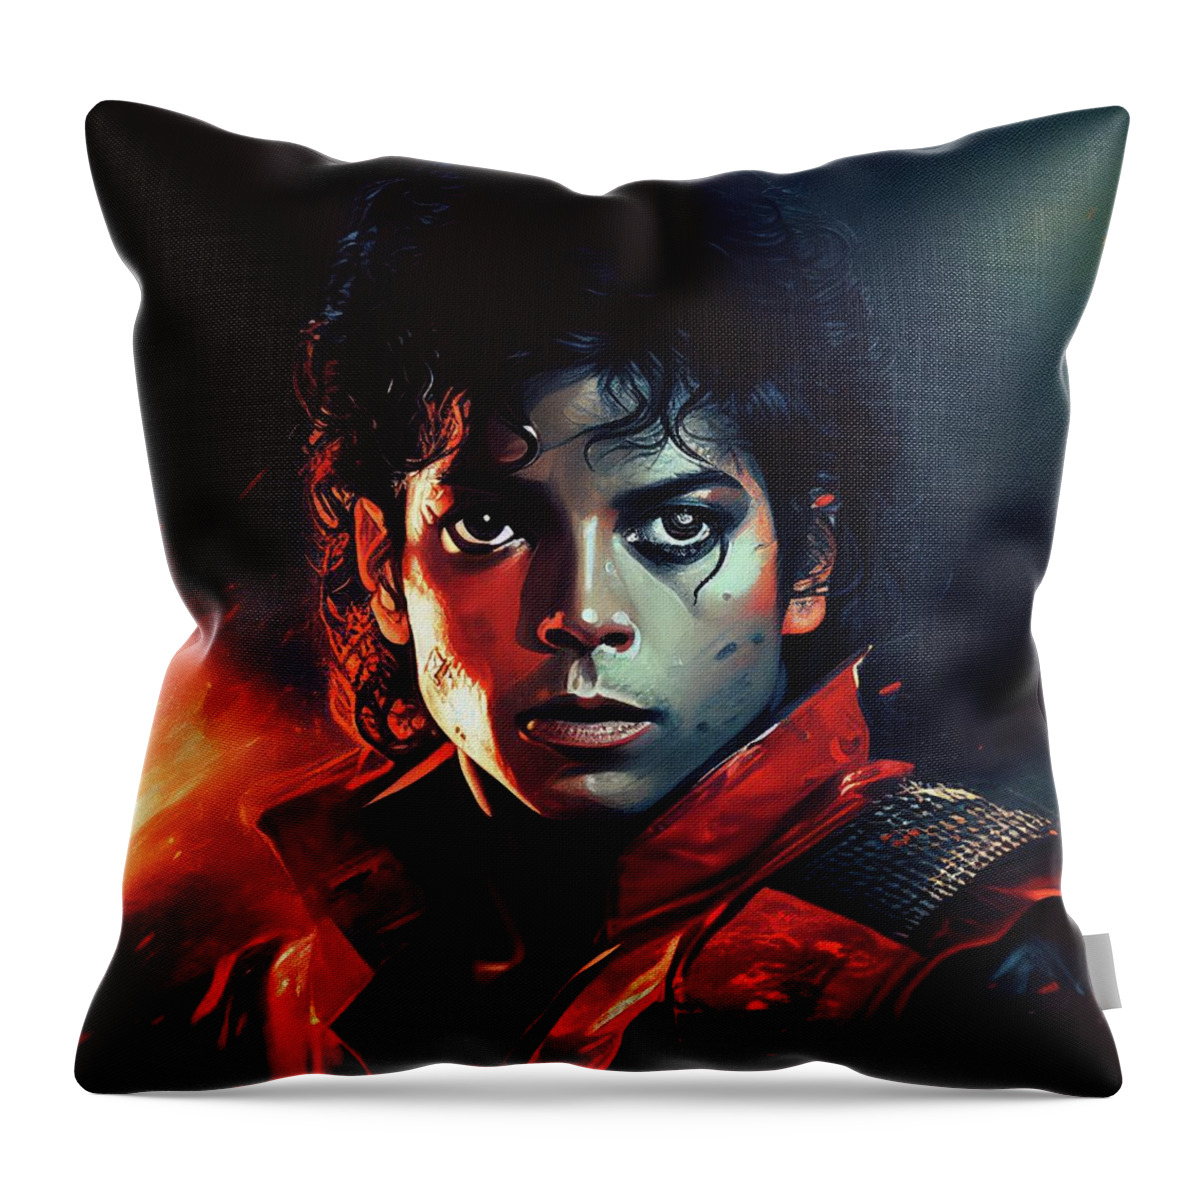 Michael Jackson Throw Pillow featuring the painting Michael Jackson No.2 by My Head Cinema